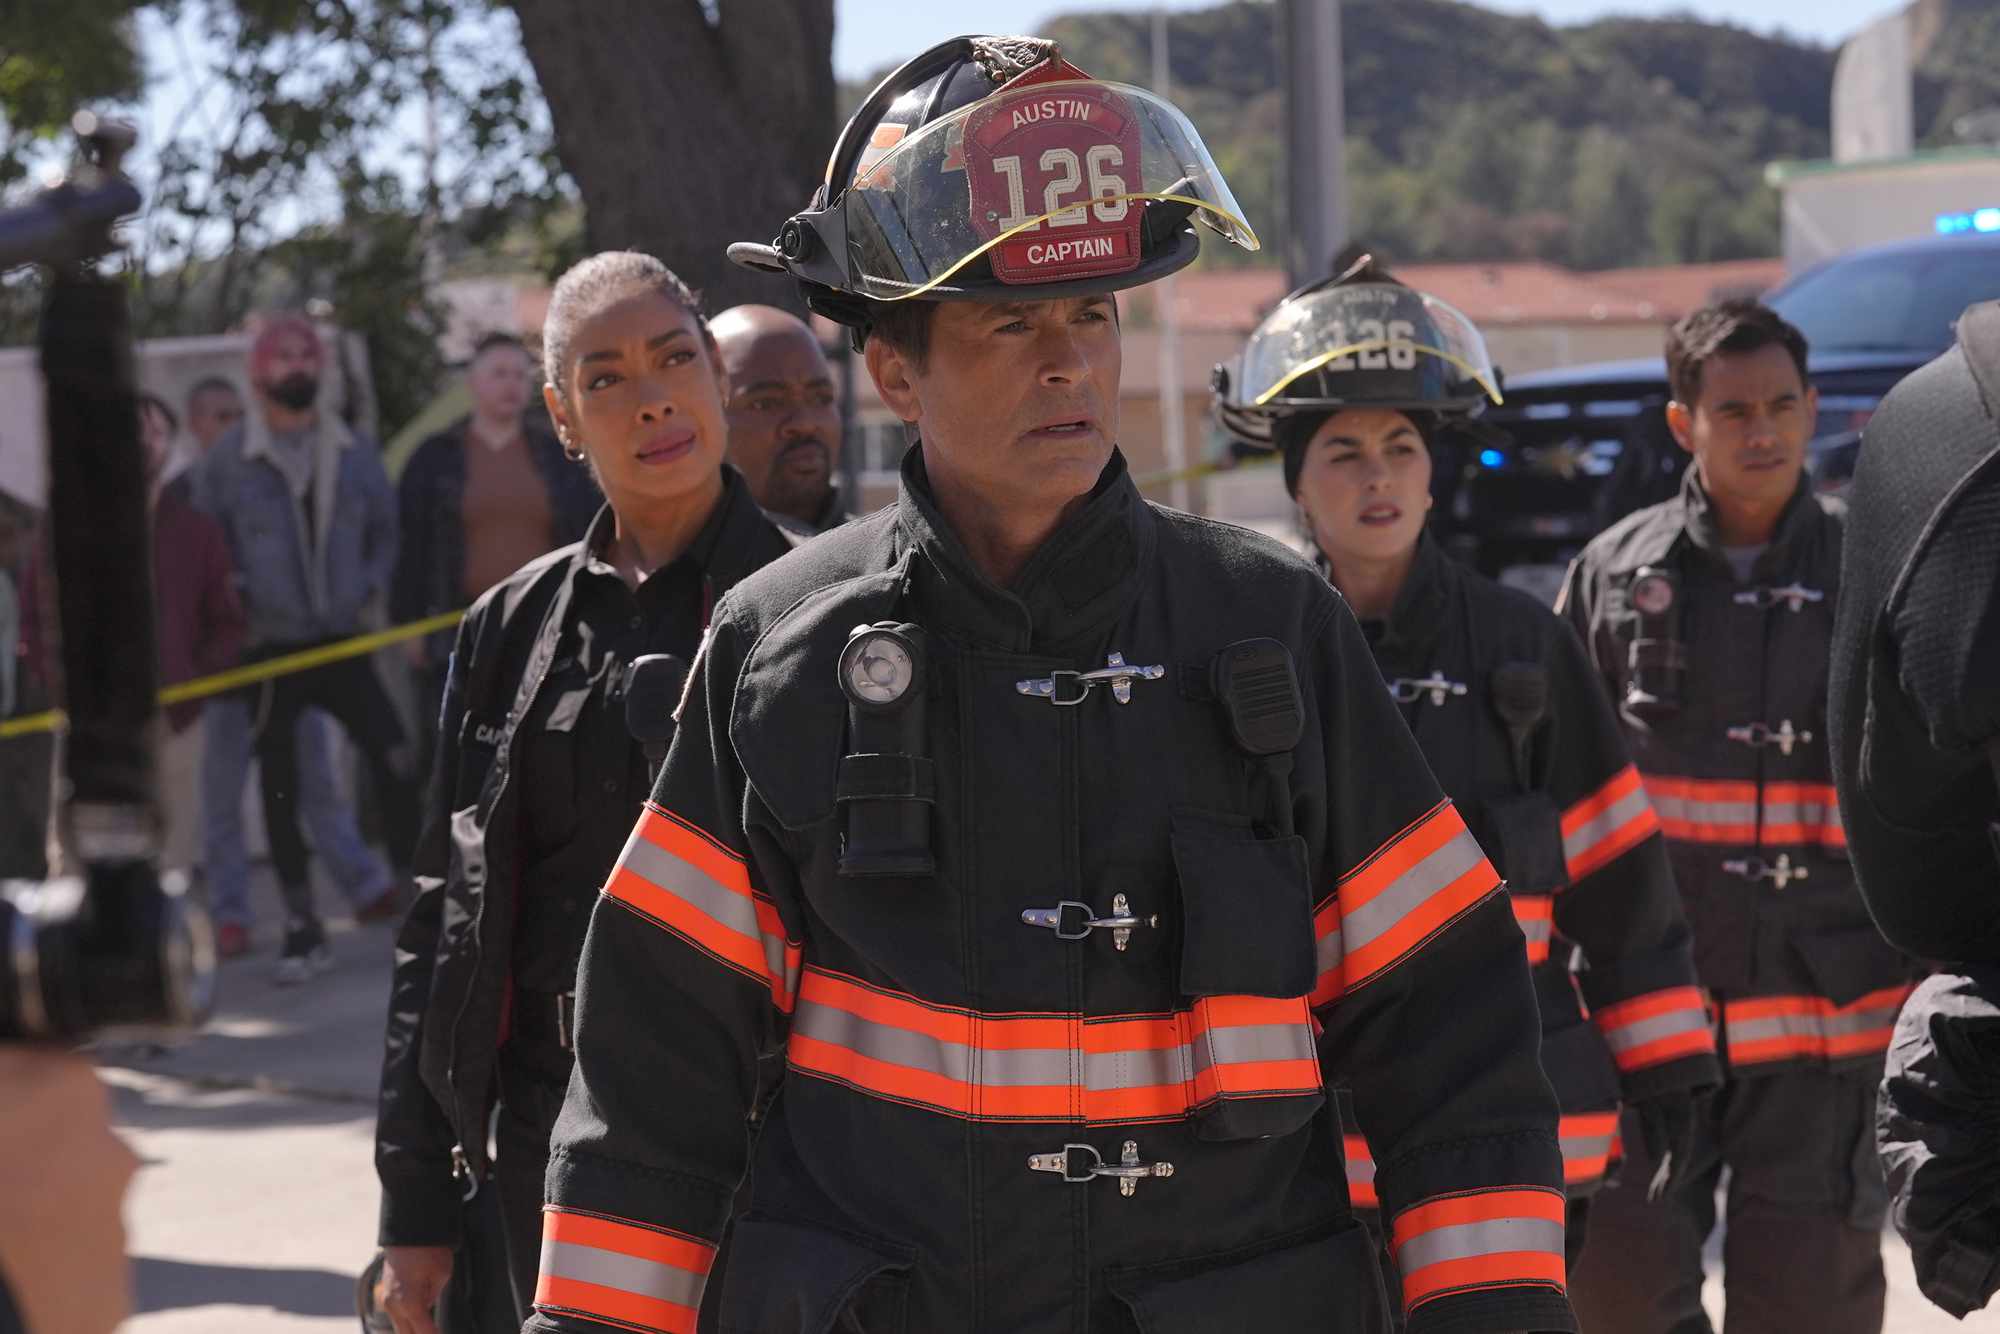 Rob Lowe Hints '9-1-1: Lone Star' Could Be Coming to an End After 5 Seasons: 'End of An Era'